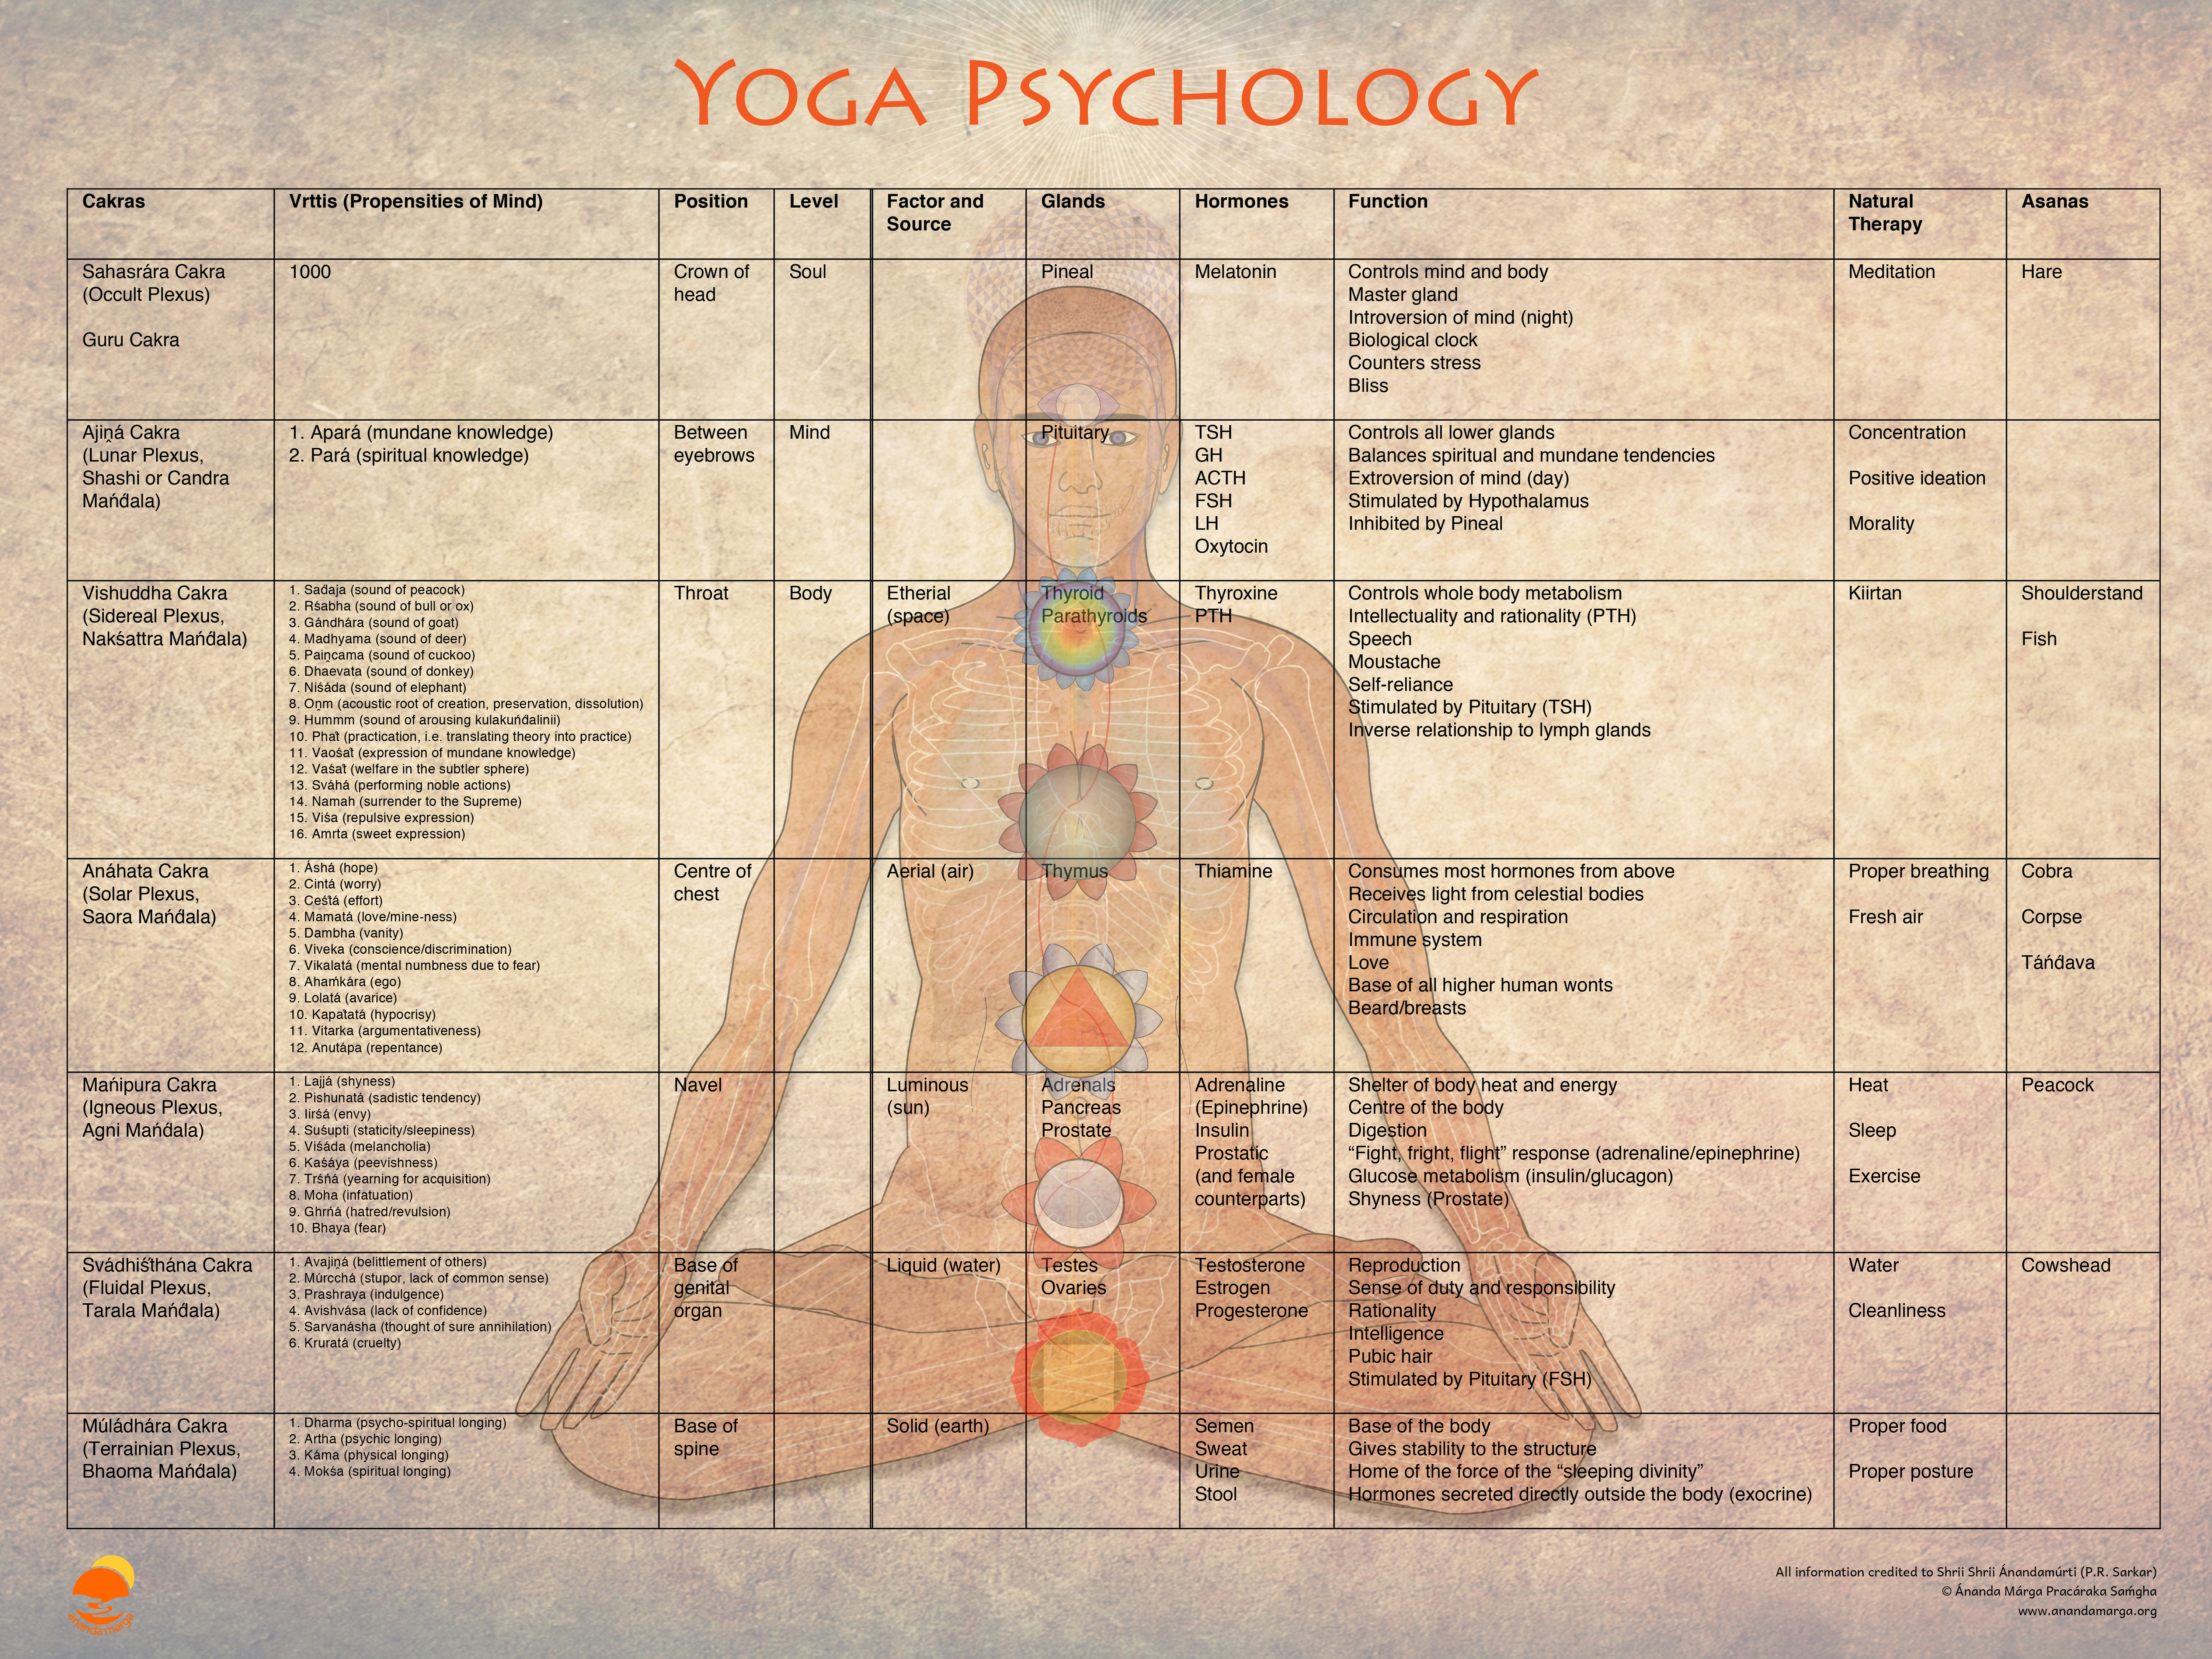 Structural Yoga Therapy Charts